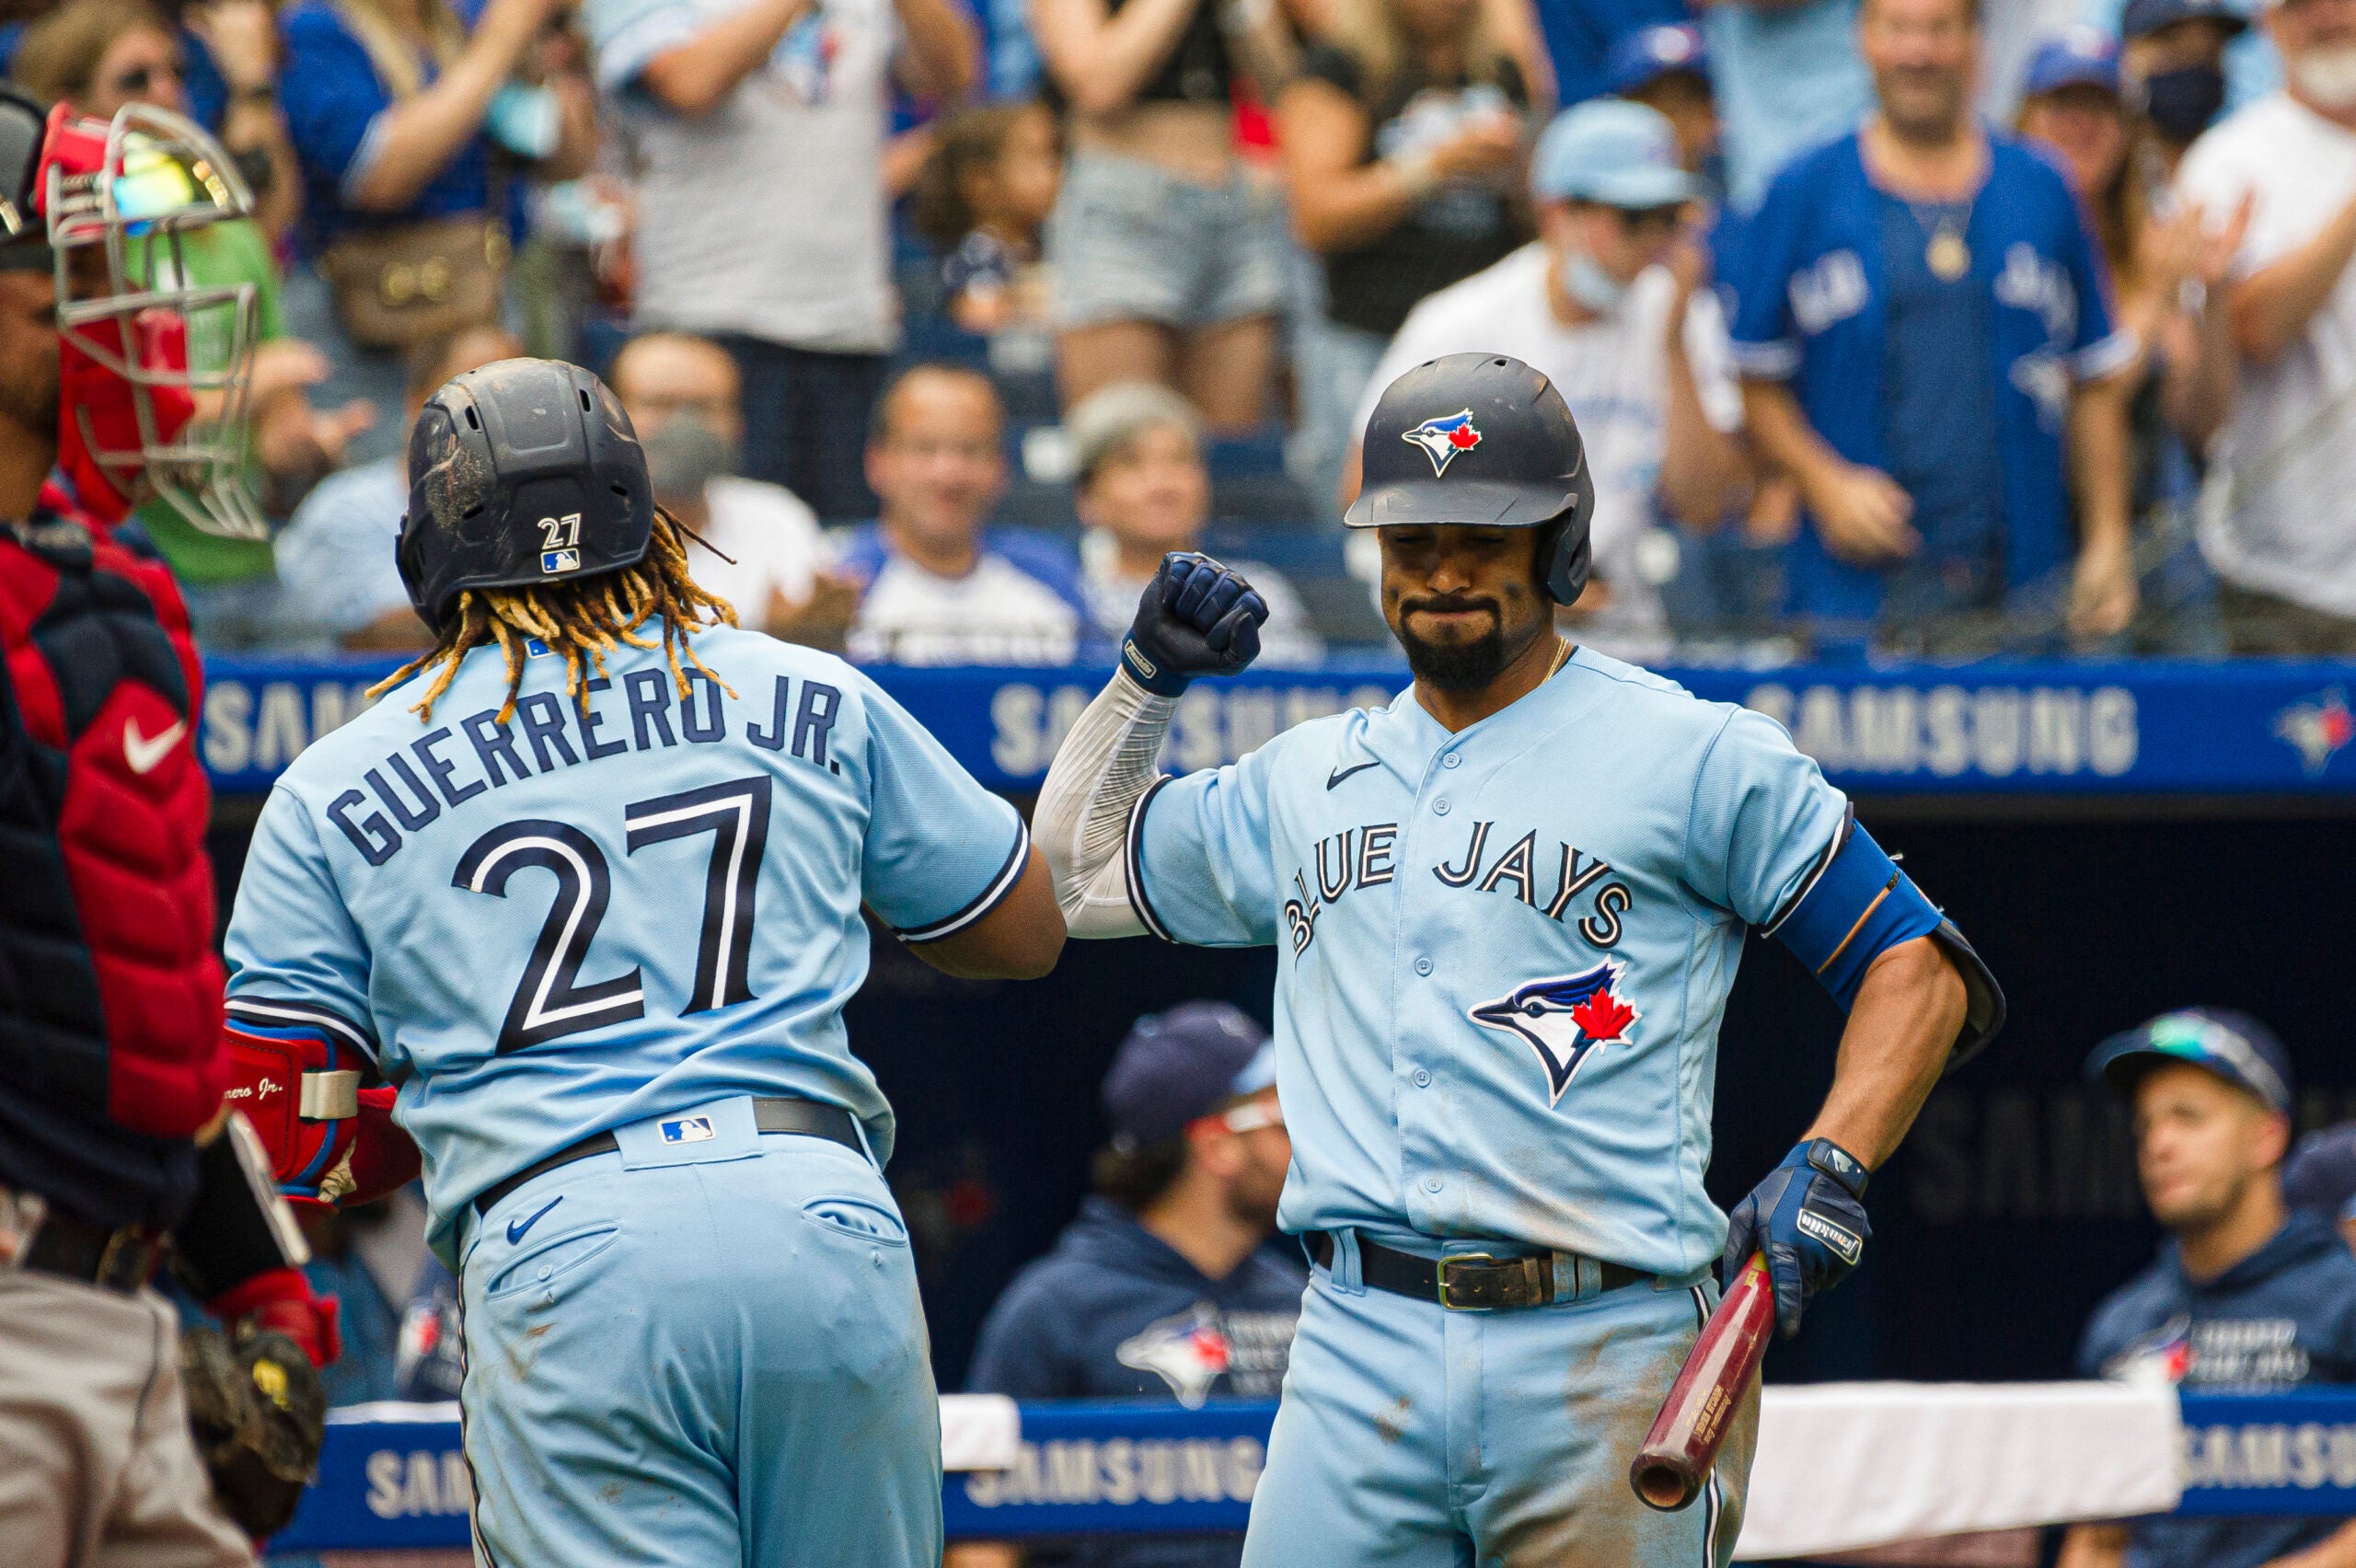 New Toronto Blue Jays uniforms are a blast from the past